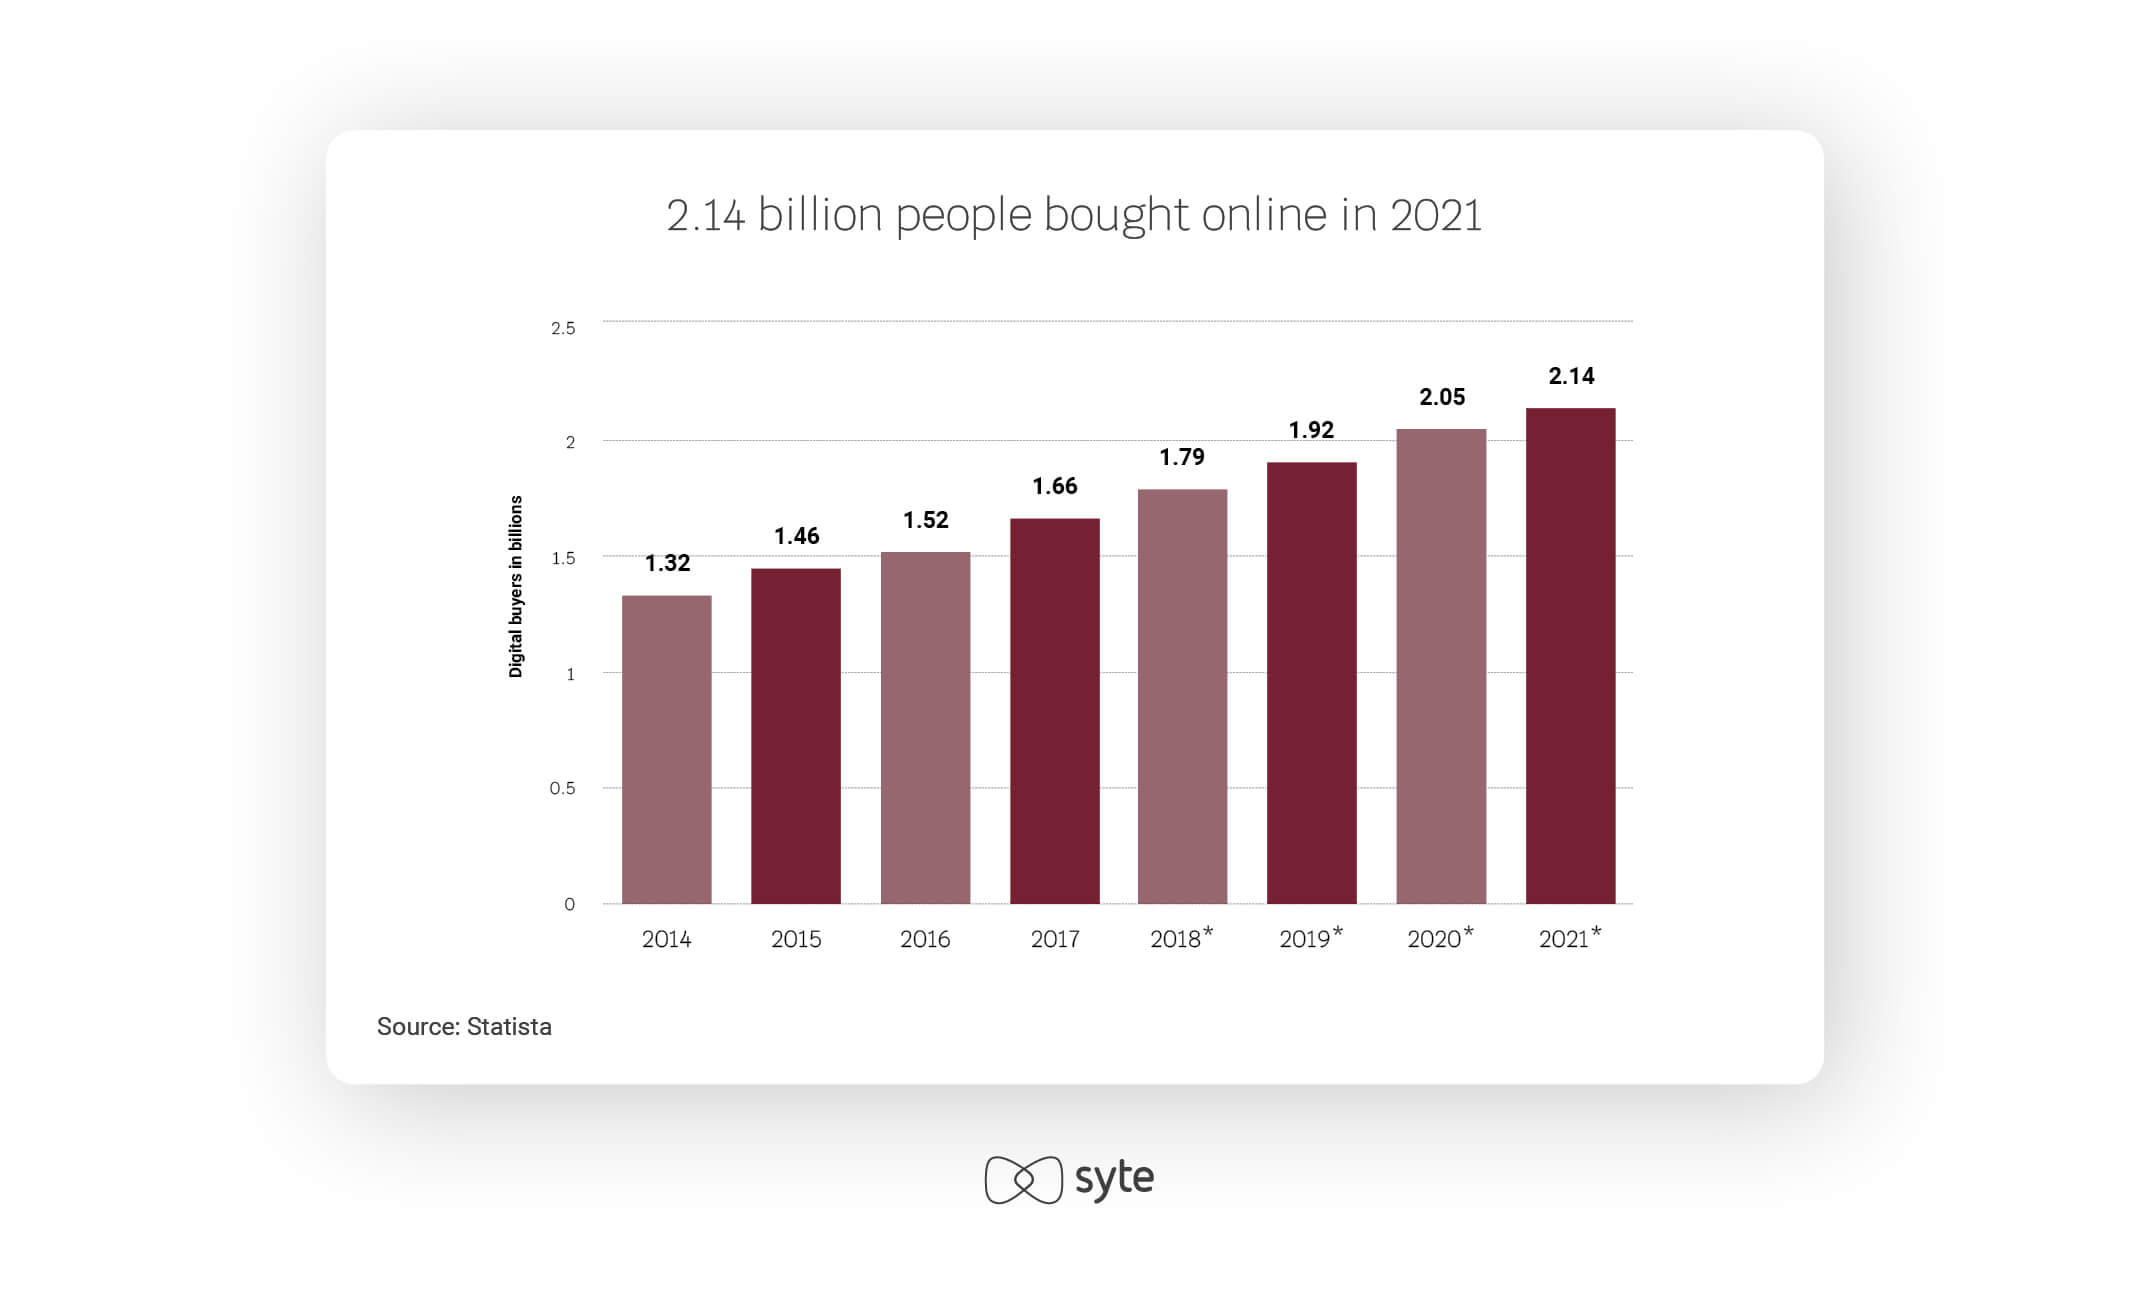 Statista infographic saying: 2.14 billion people bought online in 2021.